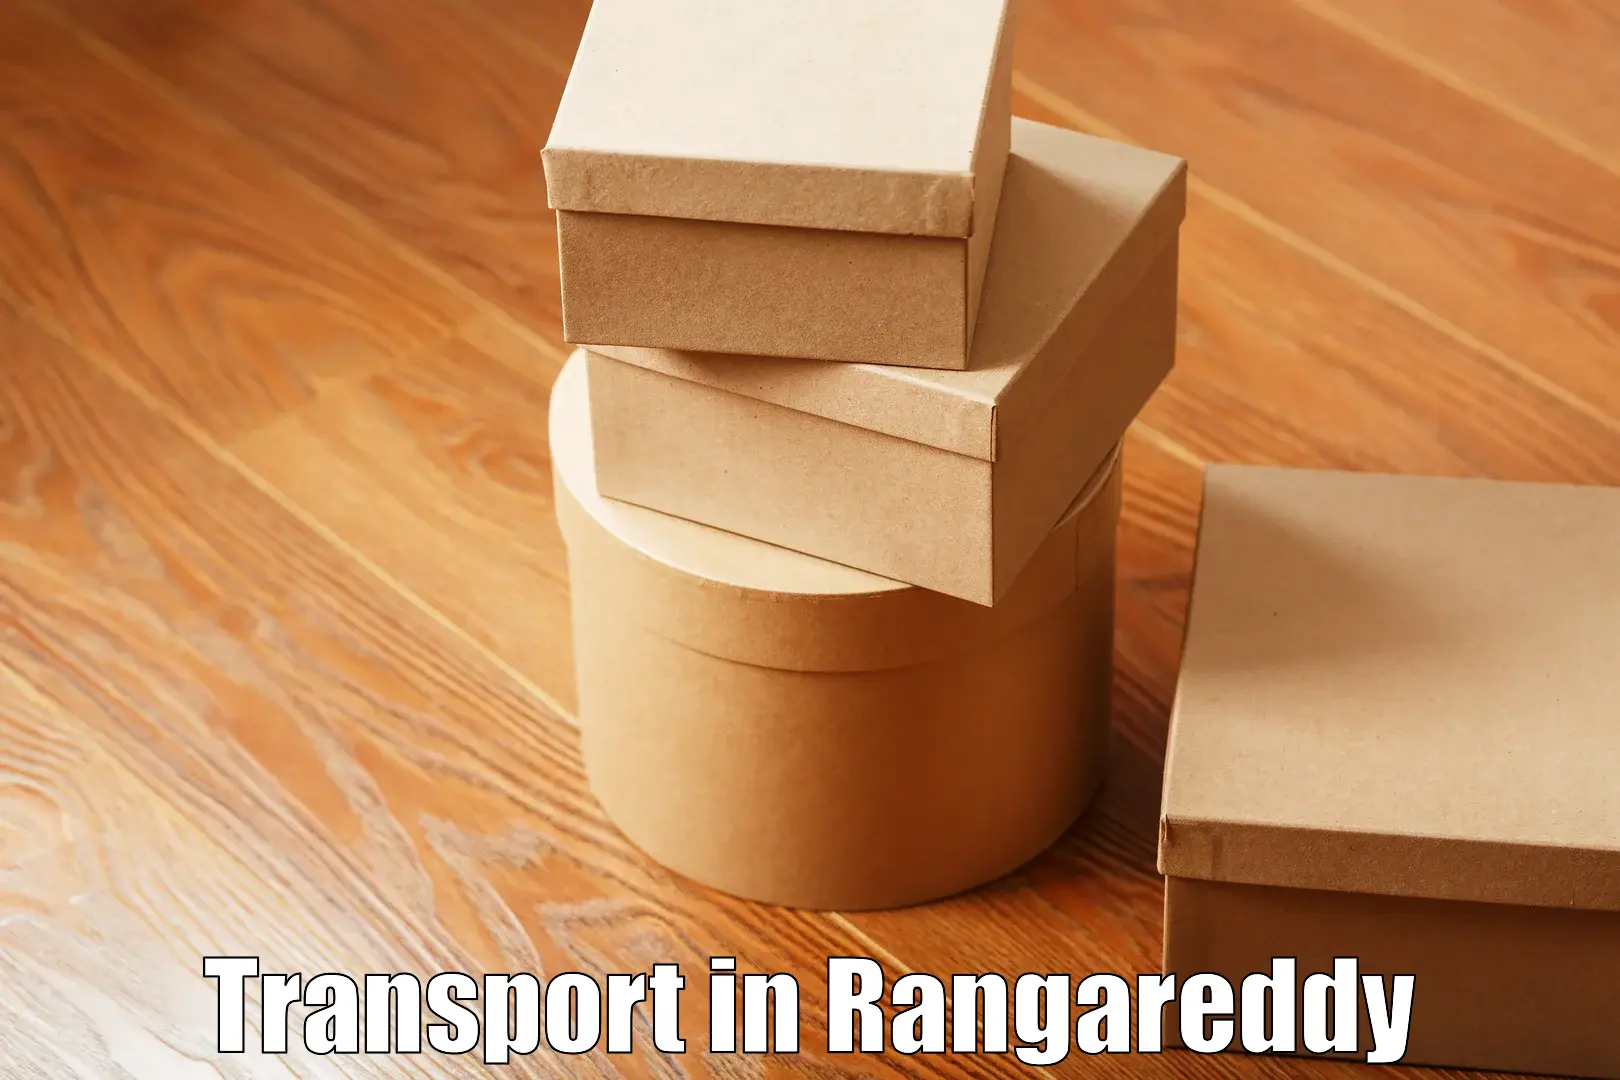 Domestic goods transportation services in Rangareddy